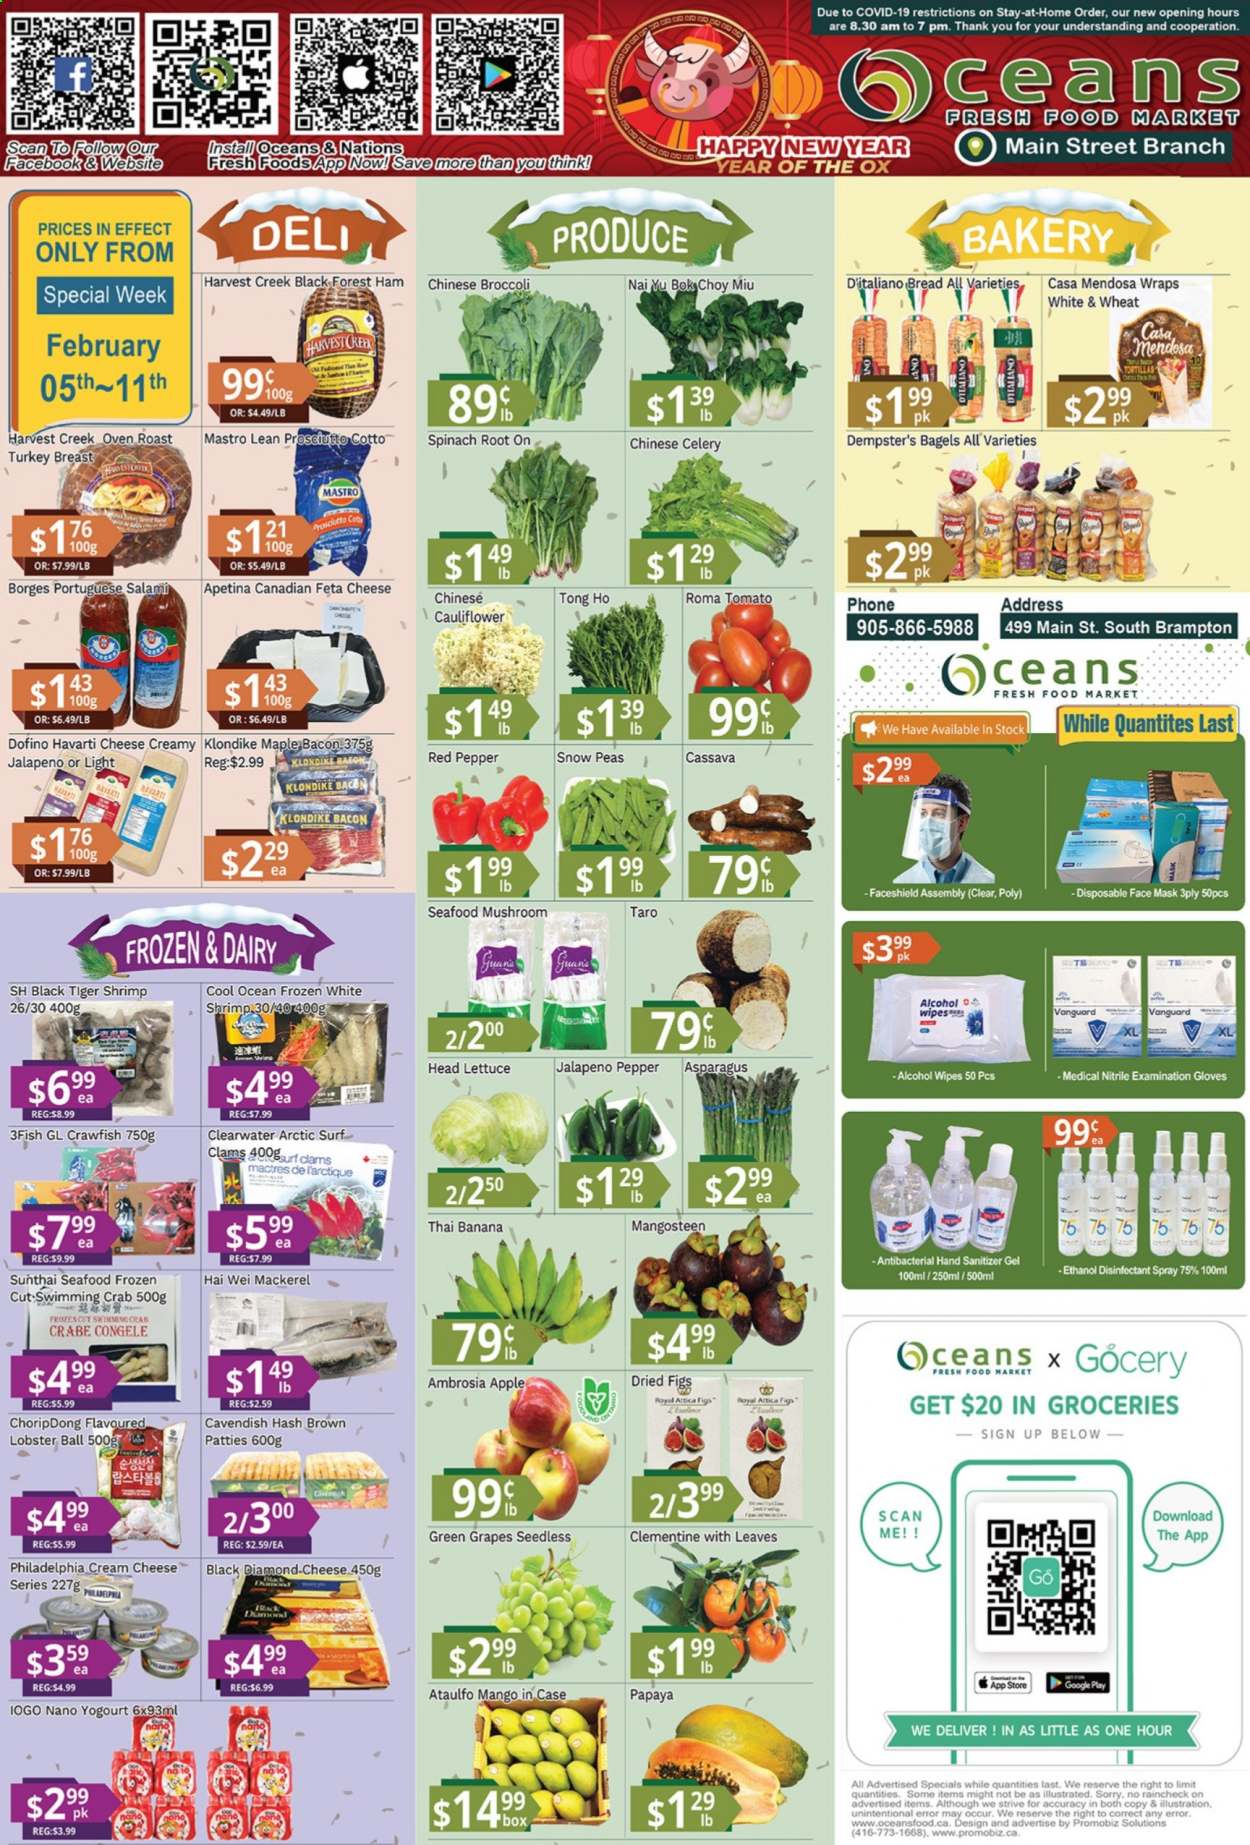 thumbnail - Oceans Flyer - February 05, 2021 - February 11, 2021 - Sales products - mushrooms, bagels, bread, tortillas, wraps, asparagus, bok choy, broccoli, cauliflower, celery, spinach, tomatoes, peas, lettuce, jalapeño, cassava, figs, grapes, mango, clams, lobster, mackerel, seafood, crab, shrimps, bacon, salami, ham, prosciutto, Havarti, cheese, feta, snow peas, crawfish, Borges, dried figs, turkey, wipes, Surf, face mask, antibacterial spray, hand sanitizer, gloves, chinese broccoli, desinfection. Page 1.